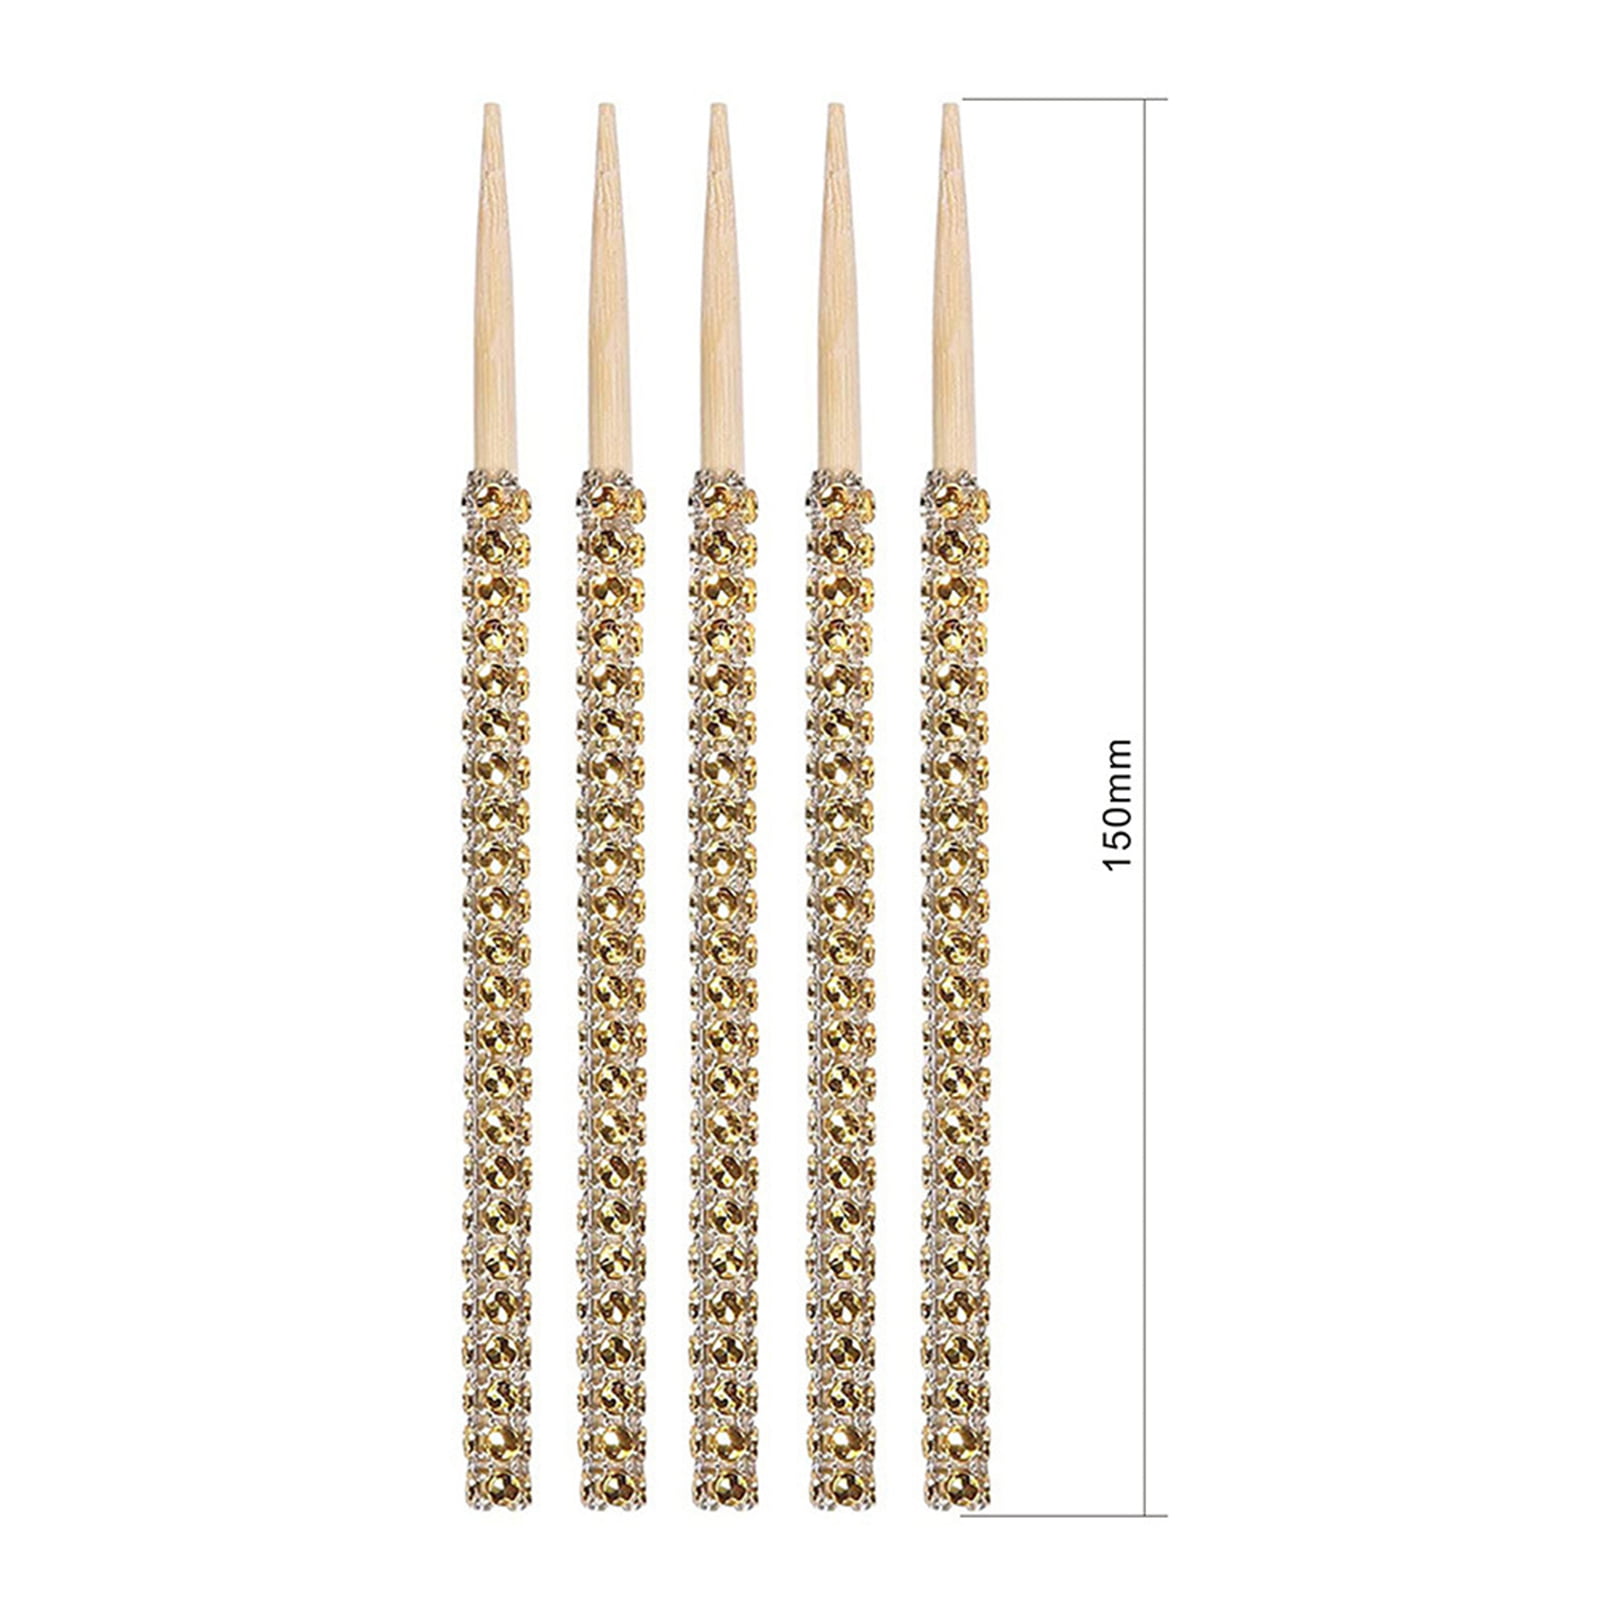 JAGOCY 24PCS Gold Candy Apple Sticks for Candy Apples Supplies 6 inch  Rhinestone Caramel Apple Bamboo Sticks Wooden Pointed Skewers for Dessert  Table